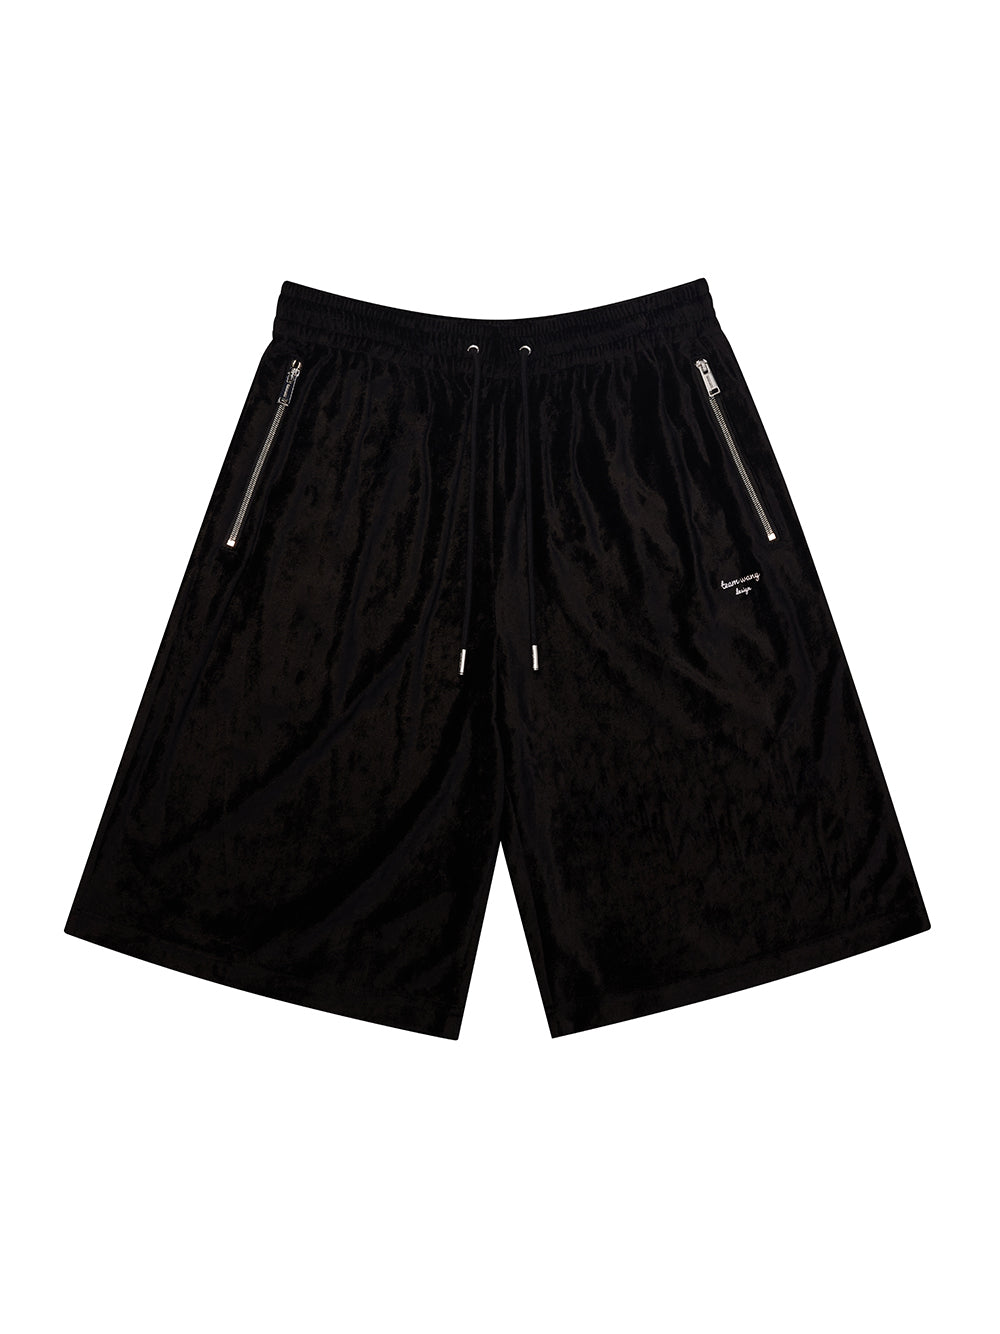 Team-Wang-Design-STAY-FOR-THE-NIGHT-Casual-Shorts-Black-1